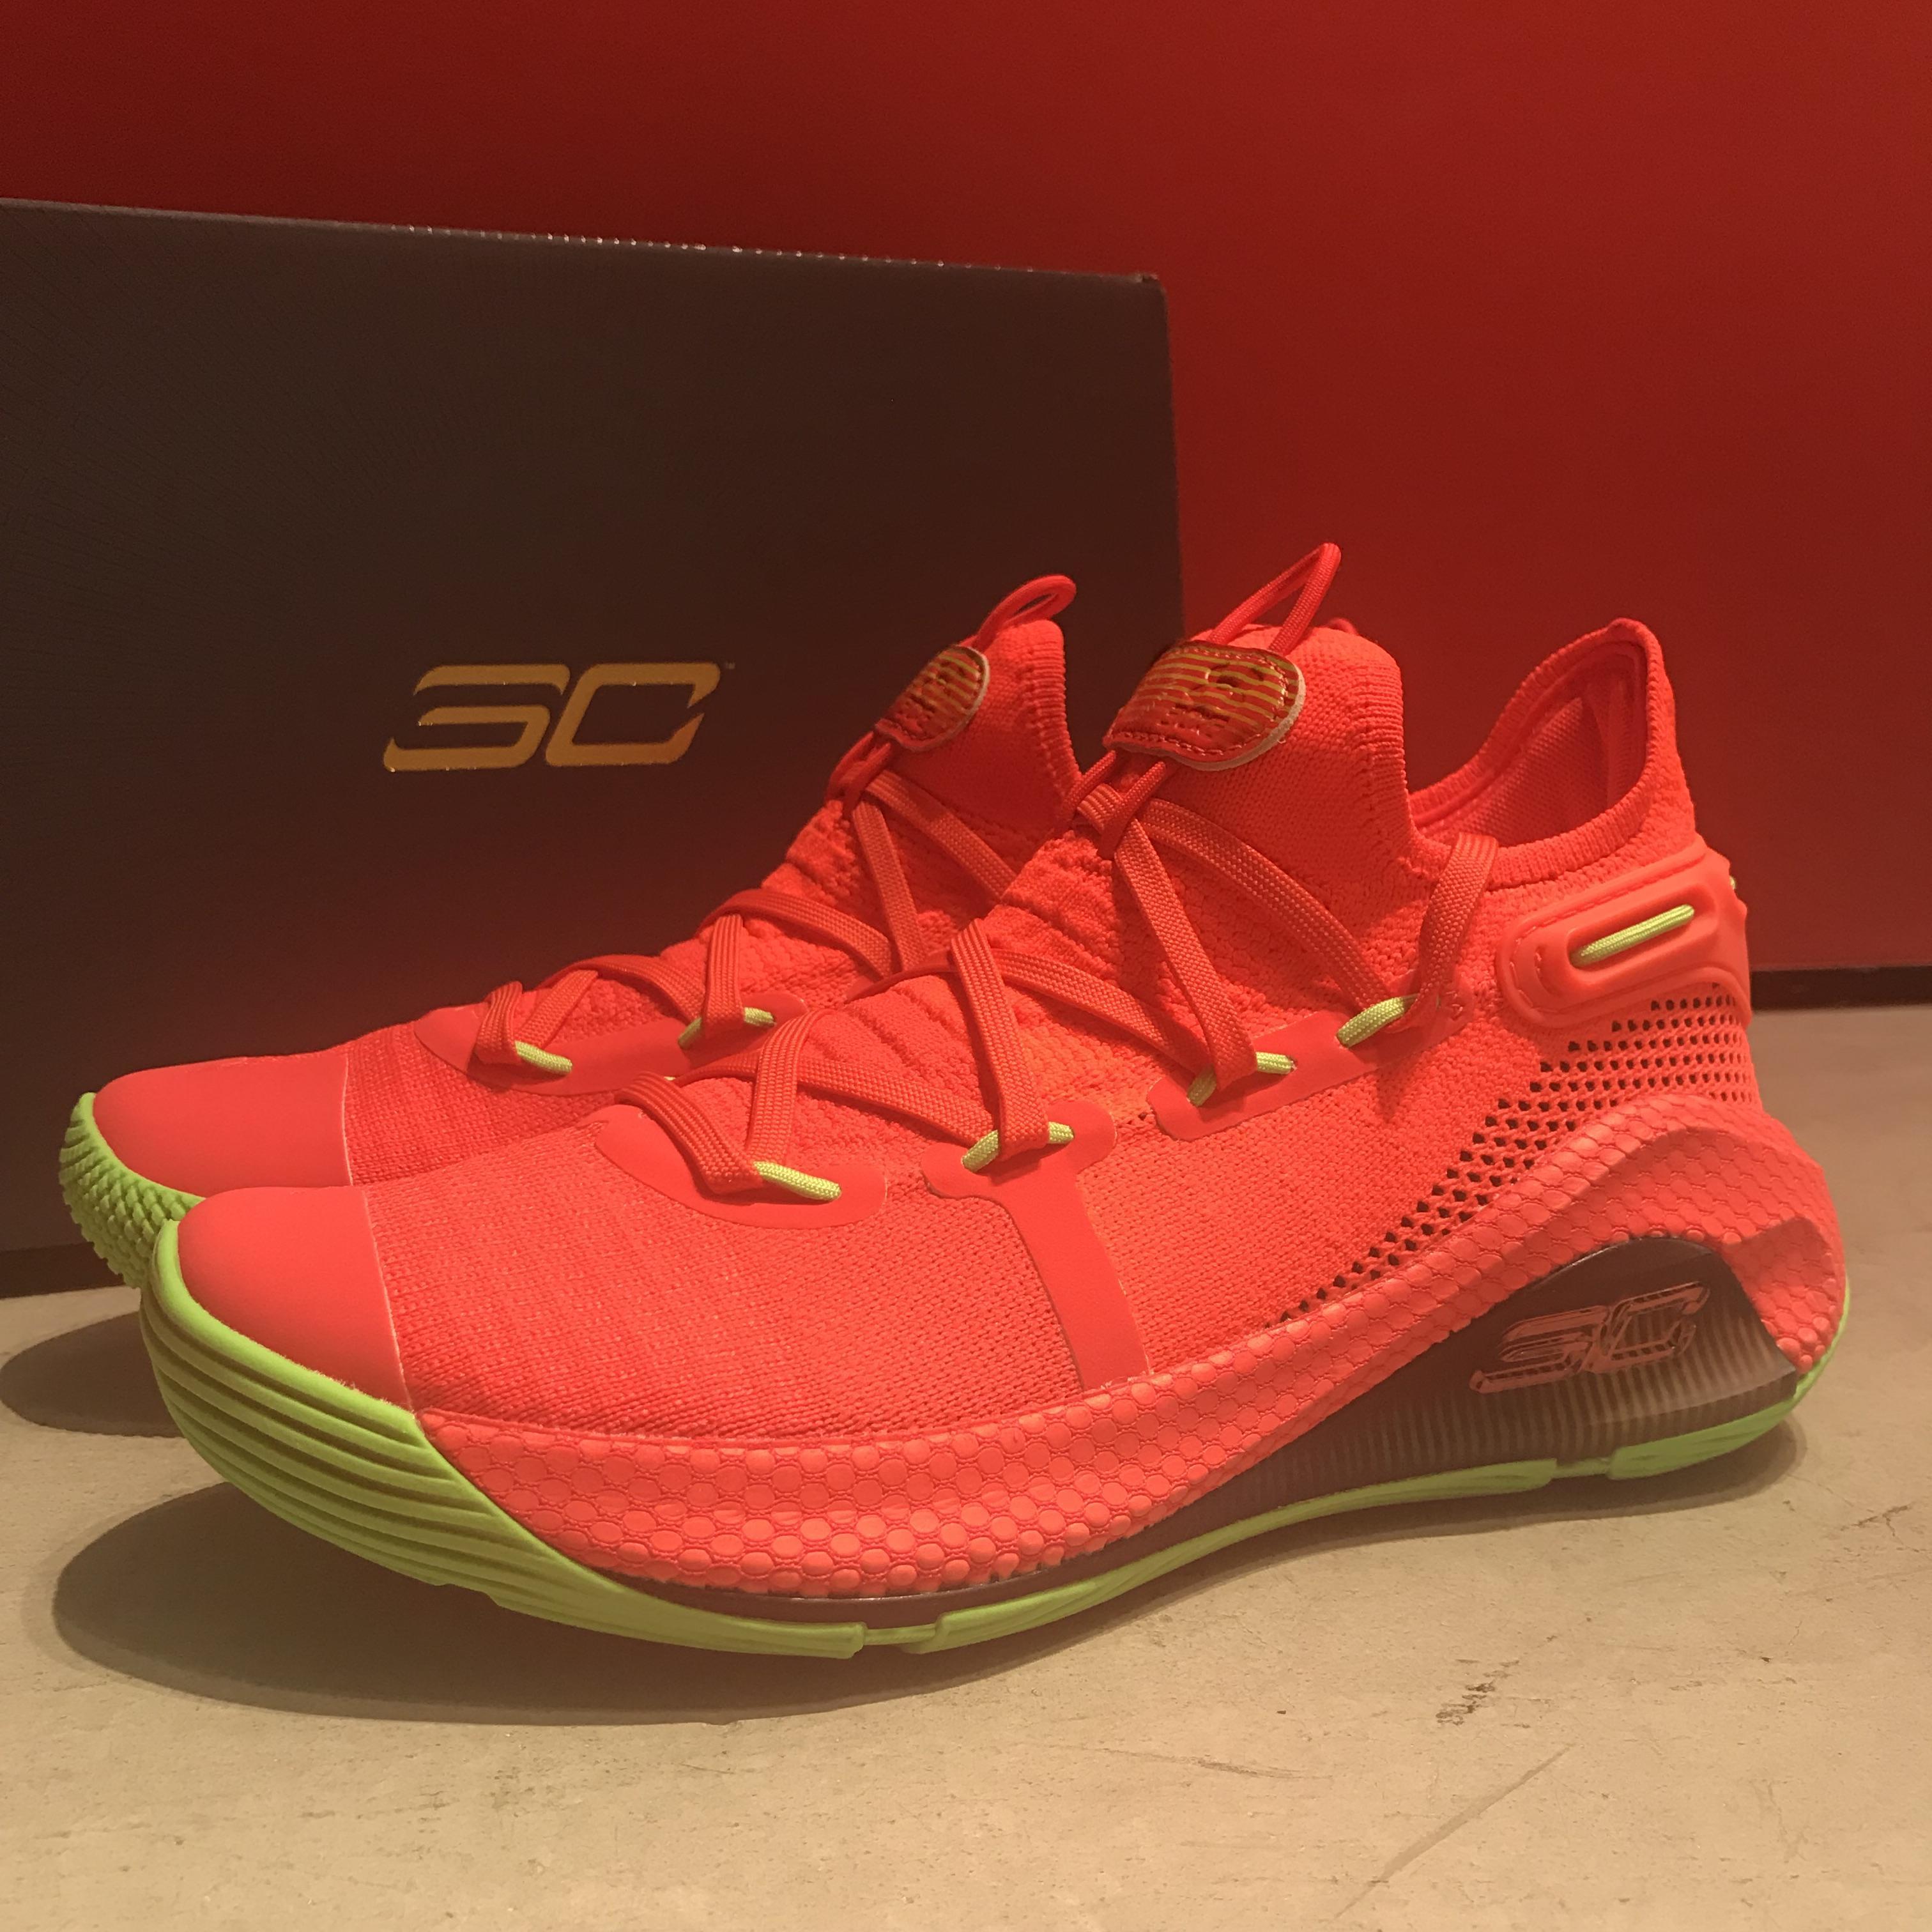 Curry6 NEWカラー登場 | UNDER ARMOUR BRAND HOUSE 心斎橋 | SHOP BLOG | UNDER